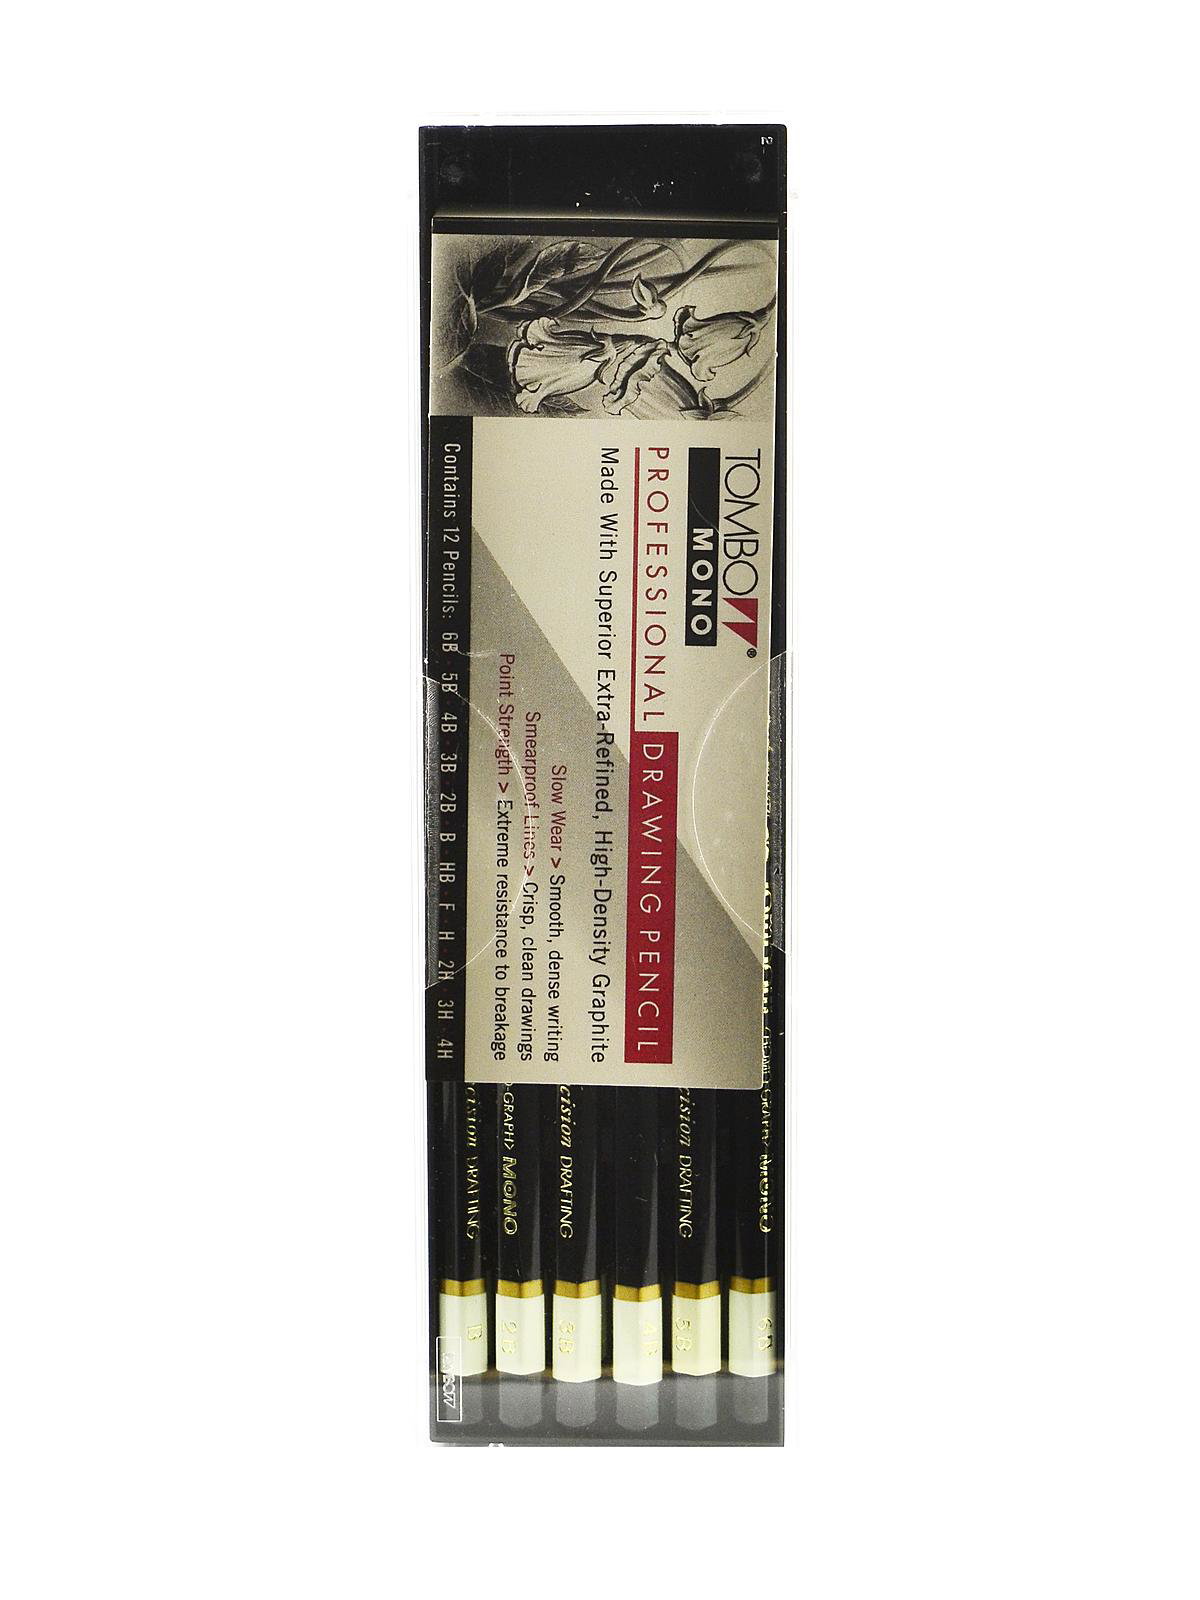 Tombow 51505 MONO Drawing Pencil, 4B, Graphite 12-Pack